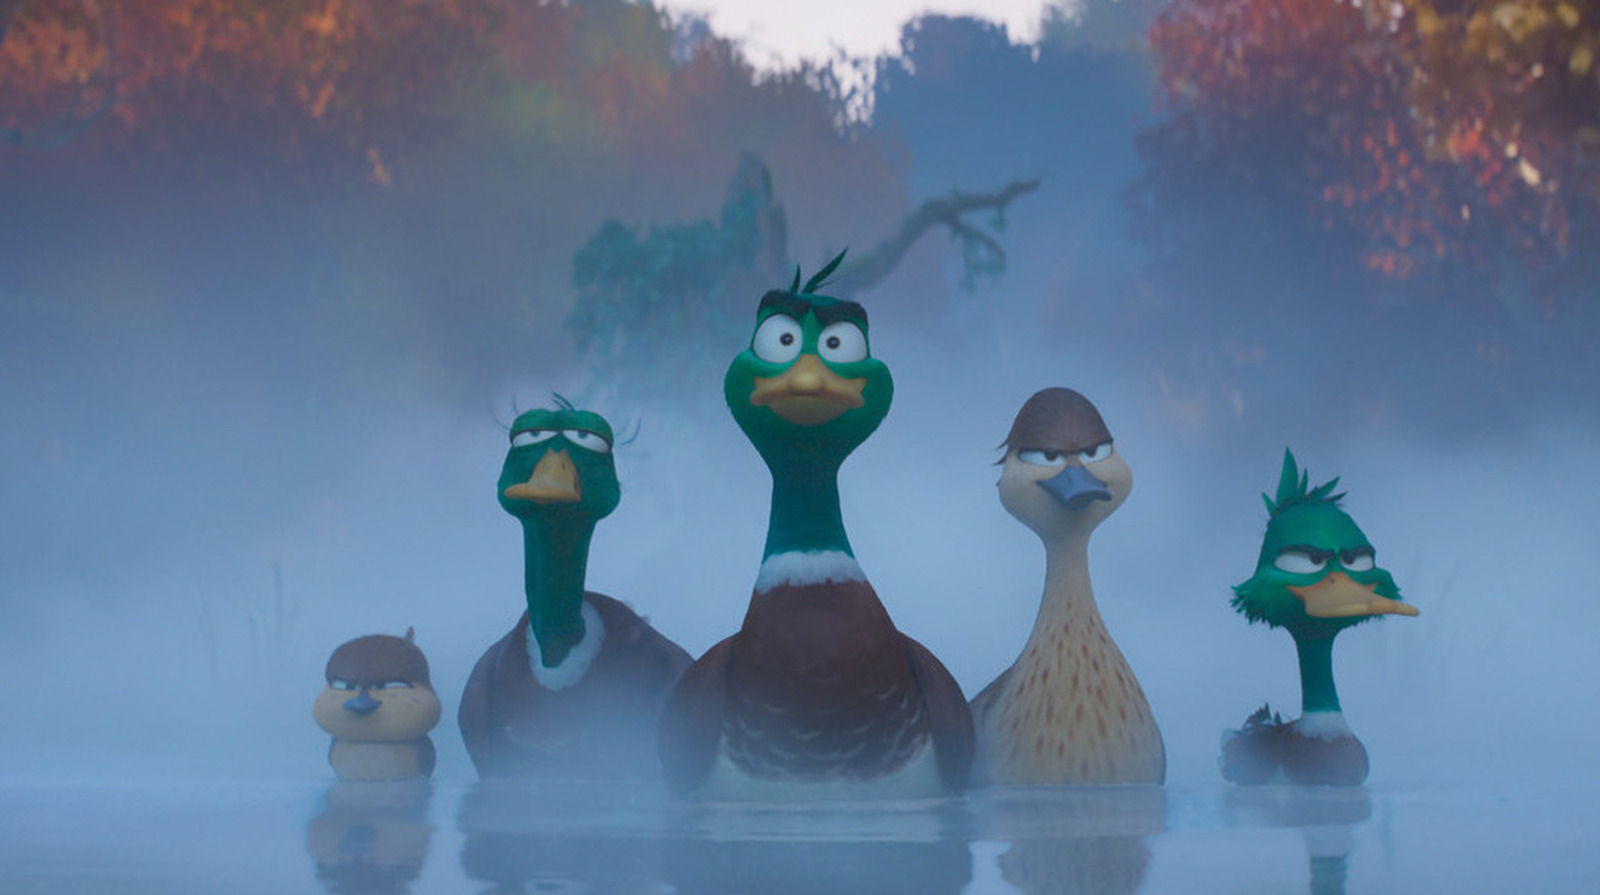 Migration looks like Illumination on National Lampoon’s holiday with ducks [Annecy 2023]